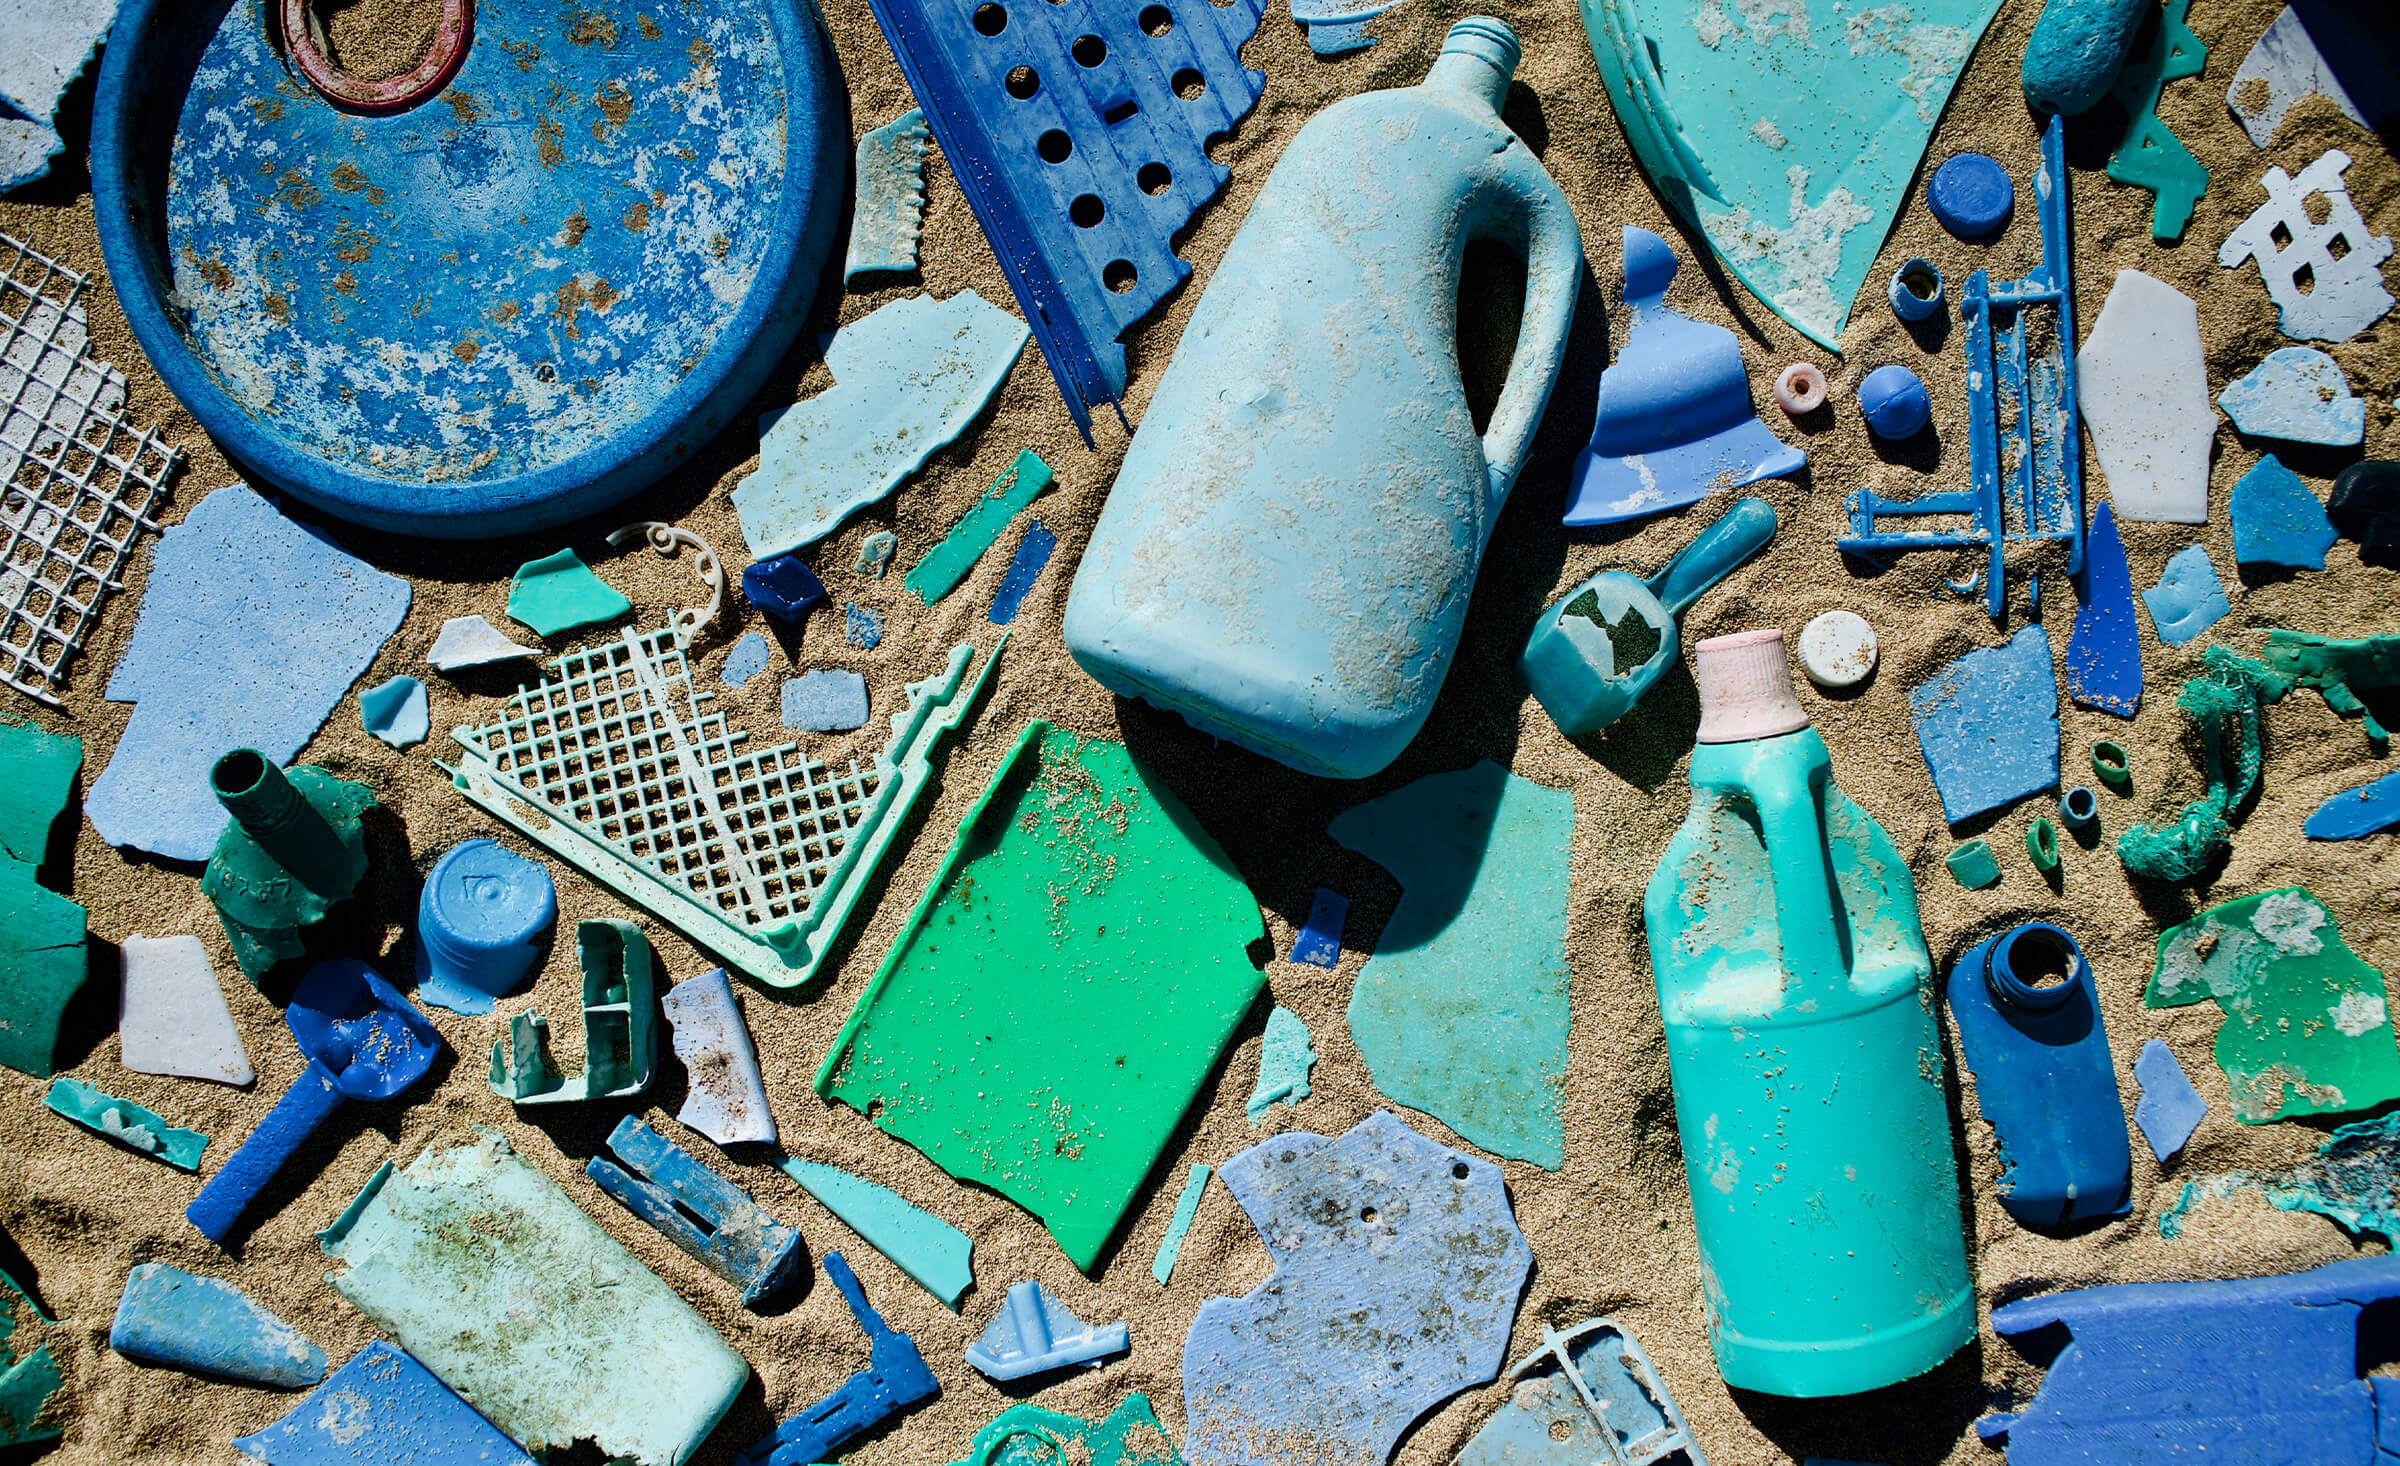 Pass the California Circular Economy and Plastic Pollution Reduction Act!